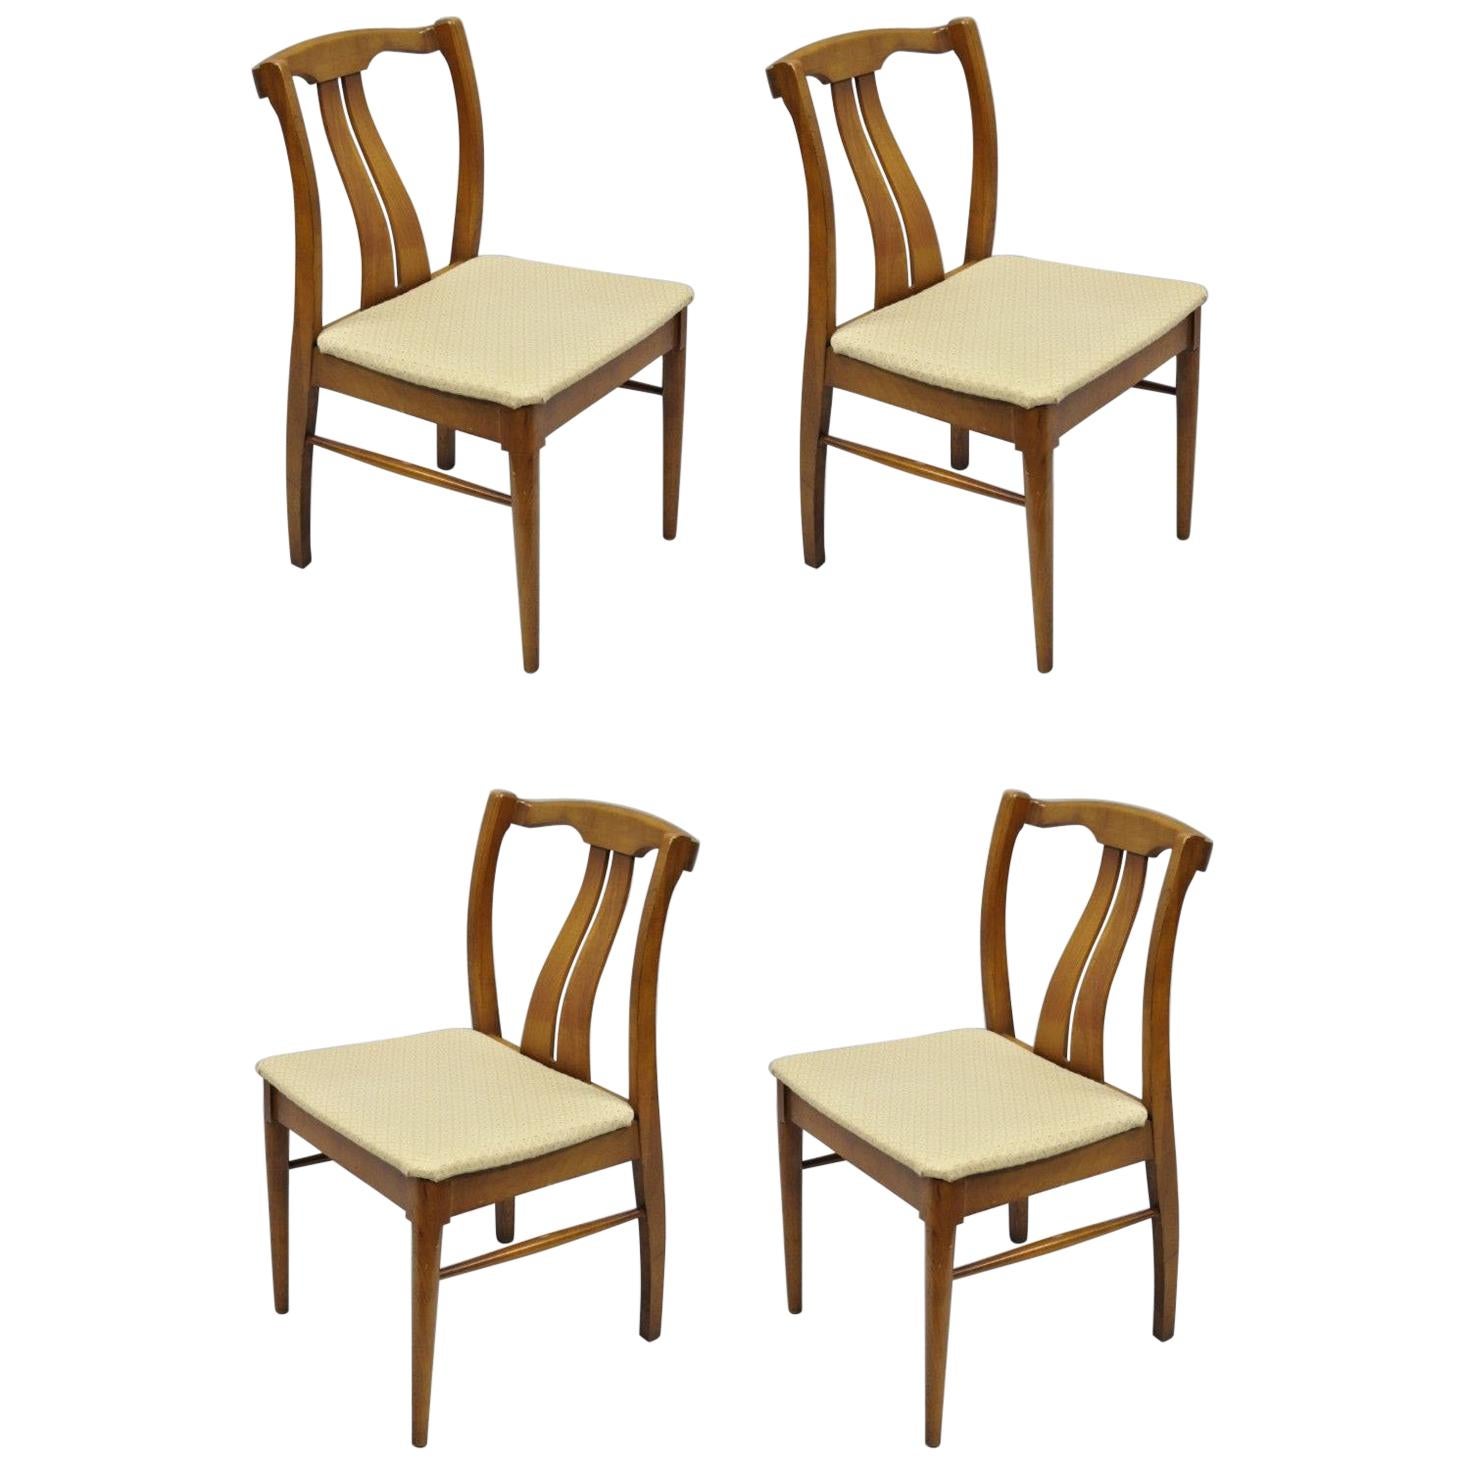 4 Vintage Mid-Century Modern Curved Back Sculptured Walnut Dining Chairs For Sale